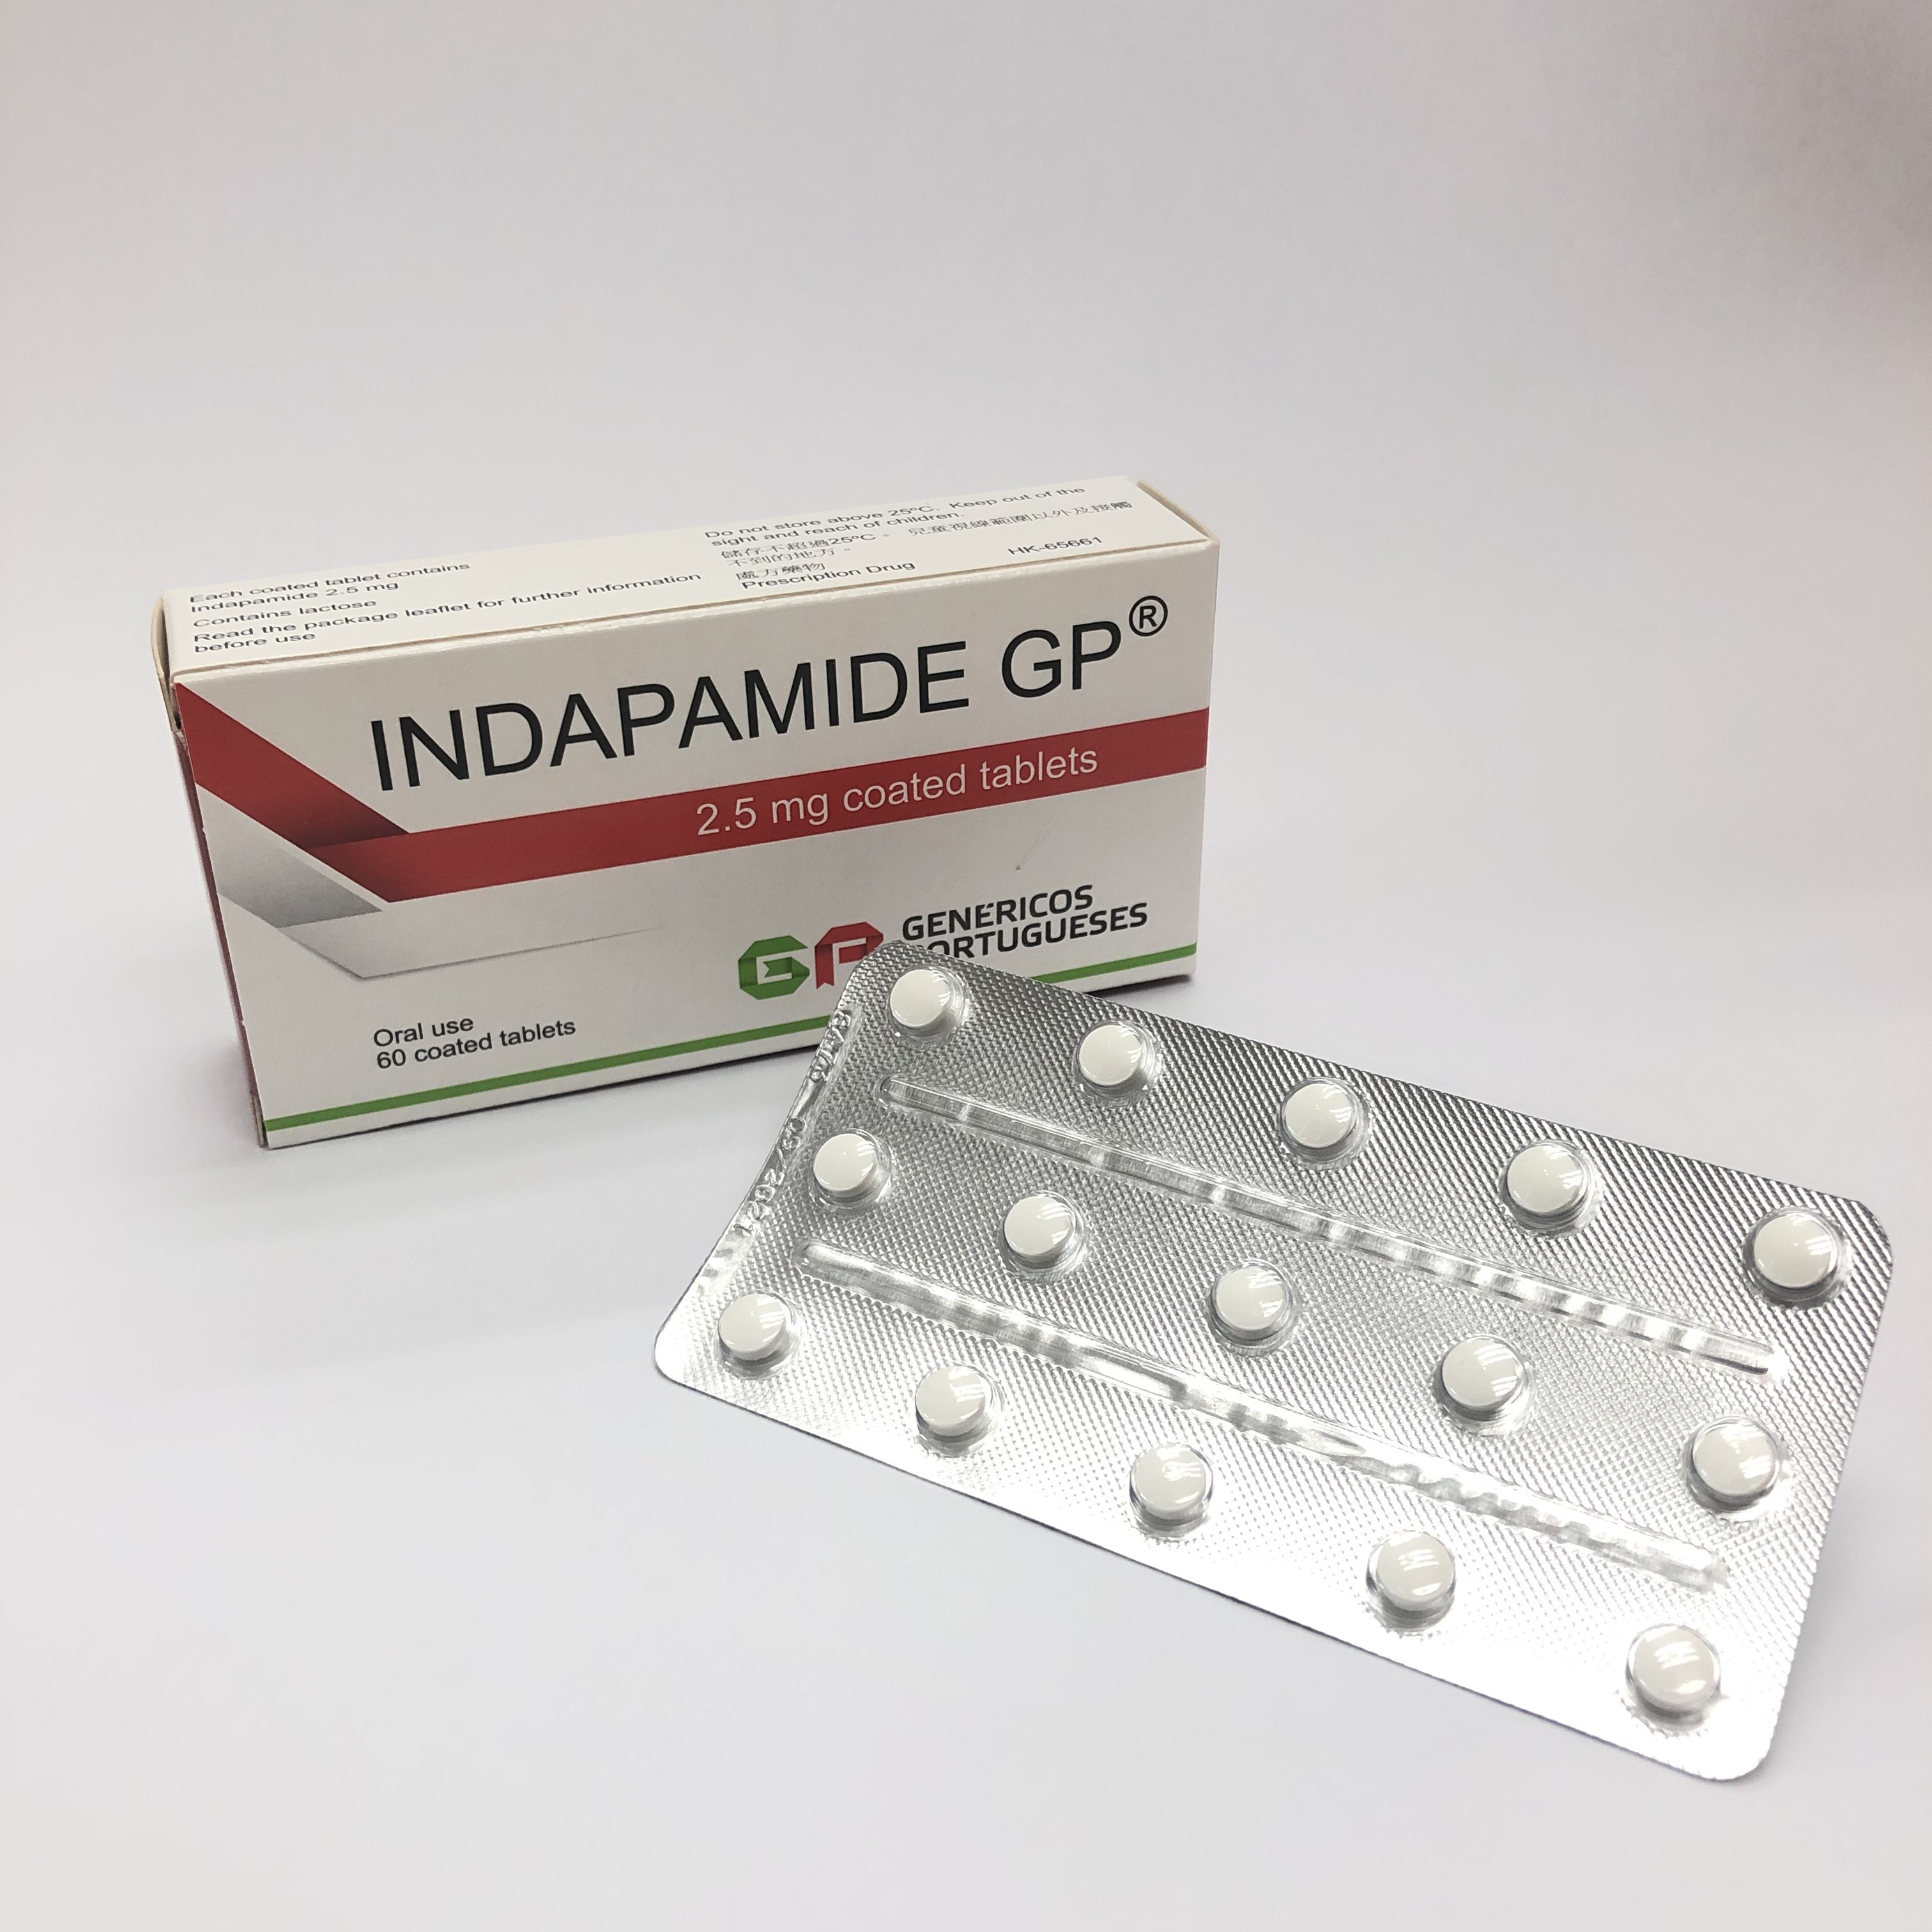 INDAPAMIDE GP Tablets 2.5mg - Product